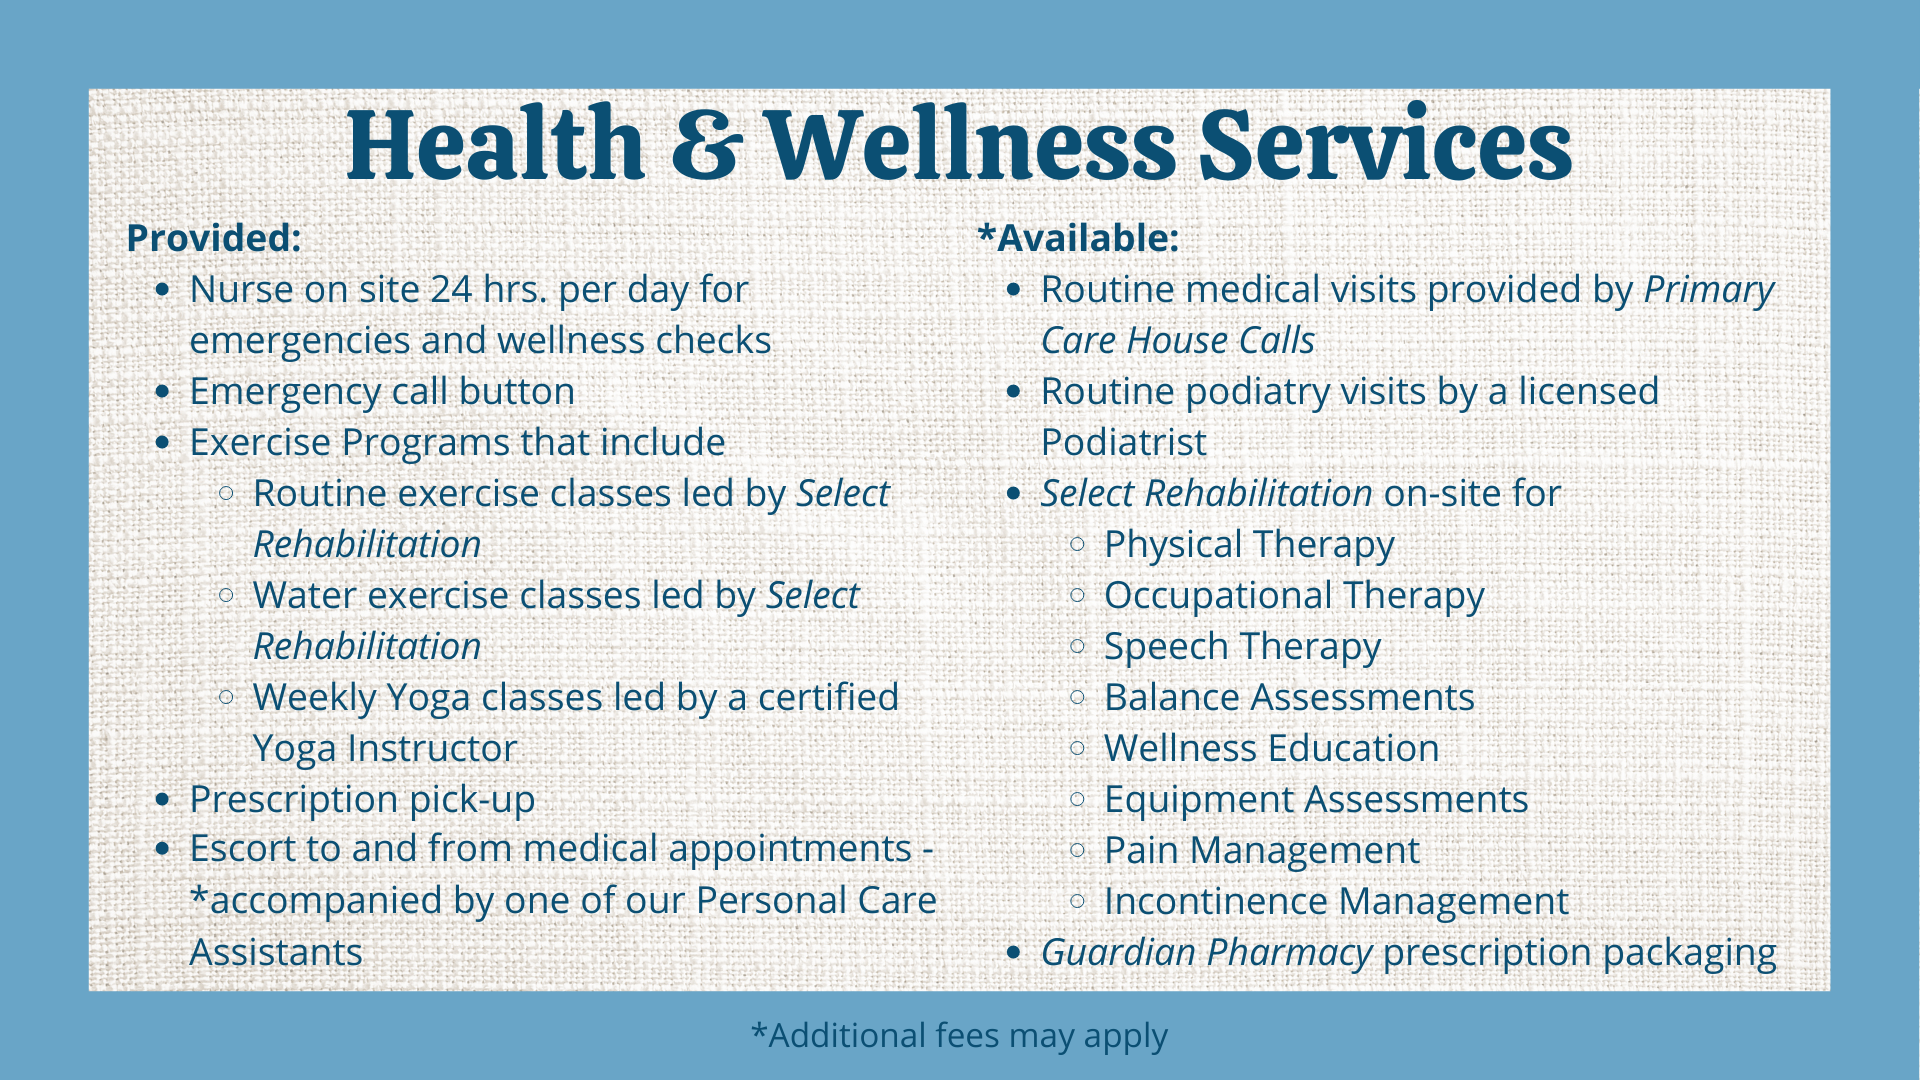 Health & Personal :: Health & Wellness :: Healthcare Devices